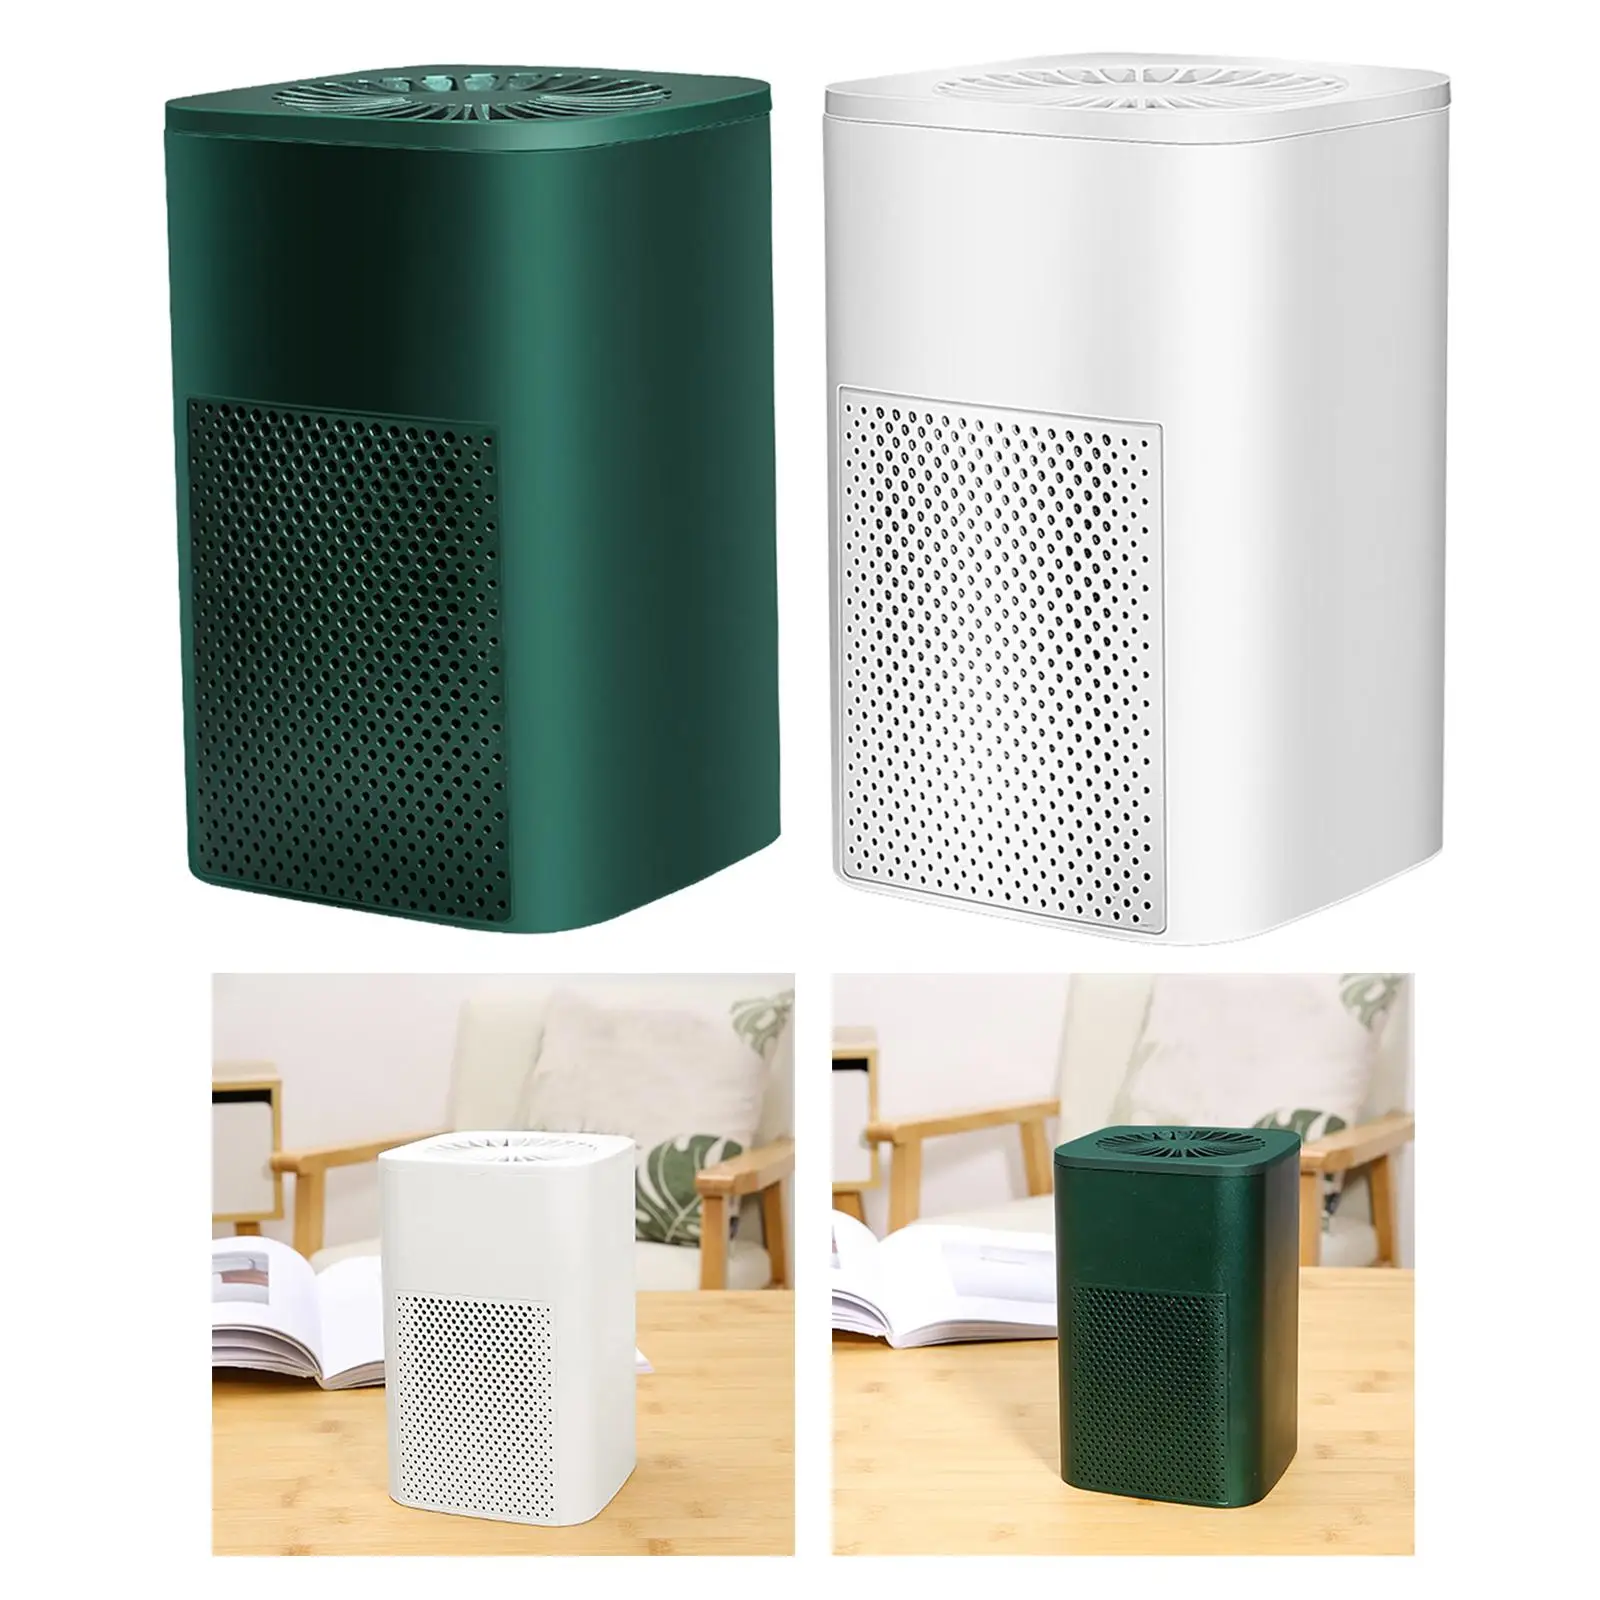 Portable Mini Air Purifier 2 Layer Activated Carbon 35dB USB Powered Home Air Cleaner Removes Dust Germs Particles Pet Allergies